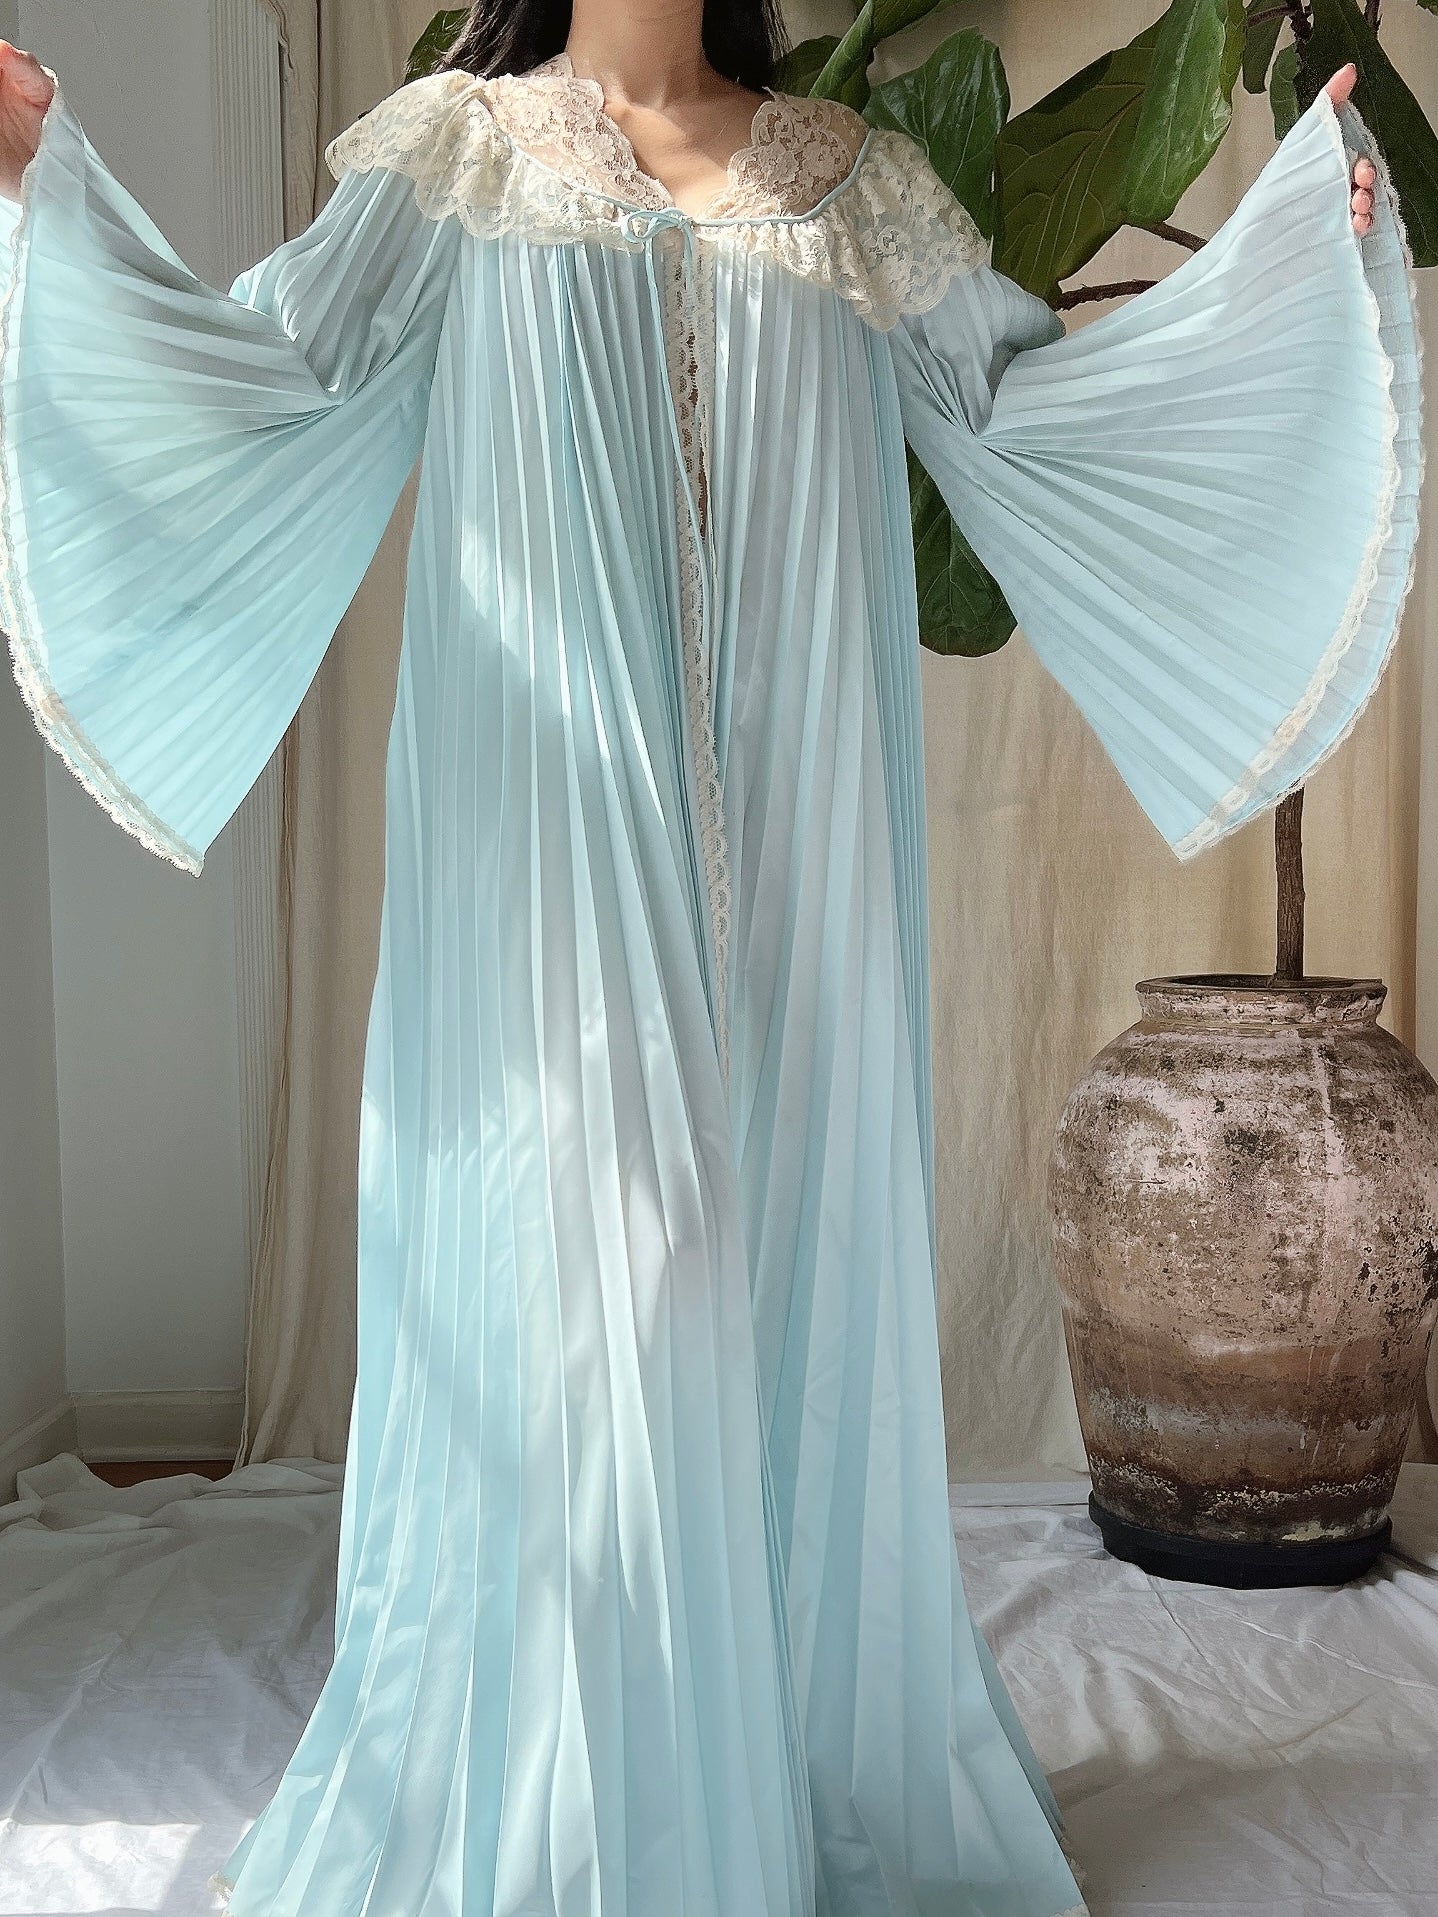 1960s Angel Wing Dressing Gown - OSFM